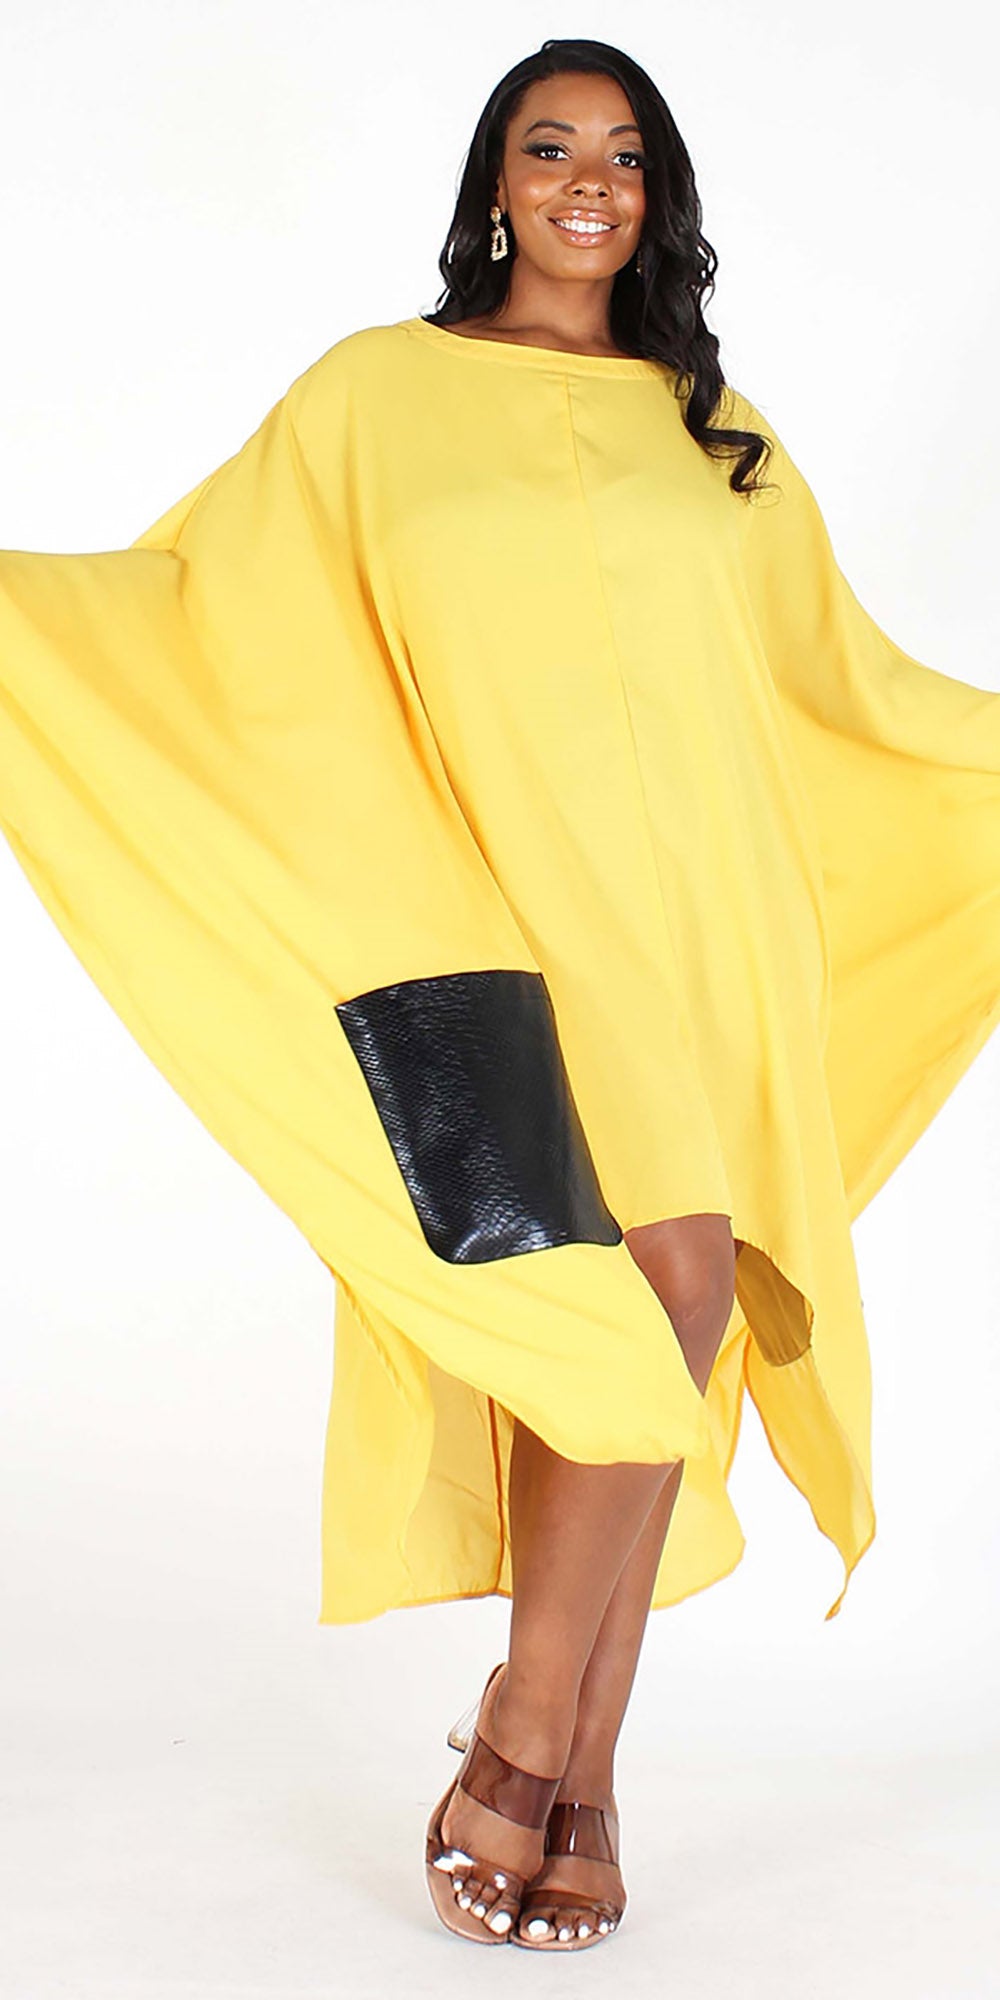 Eien EI1833 - Yellow - Sheer Faux Leather Pocket Top